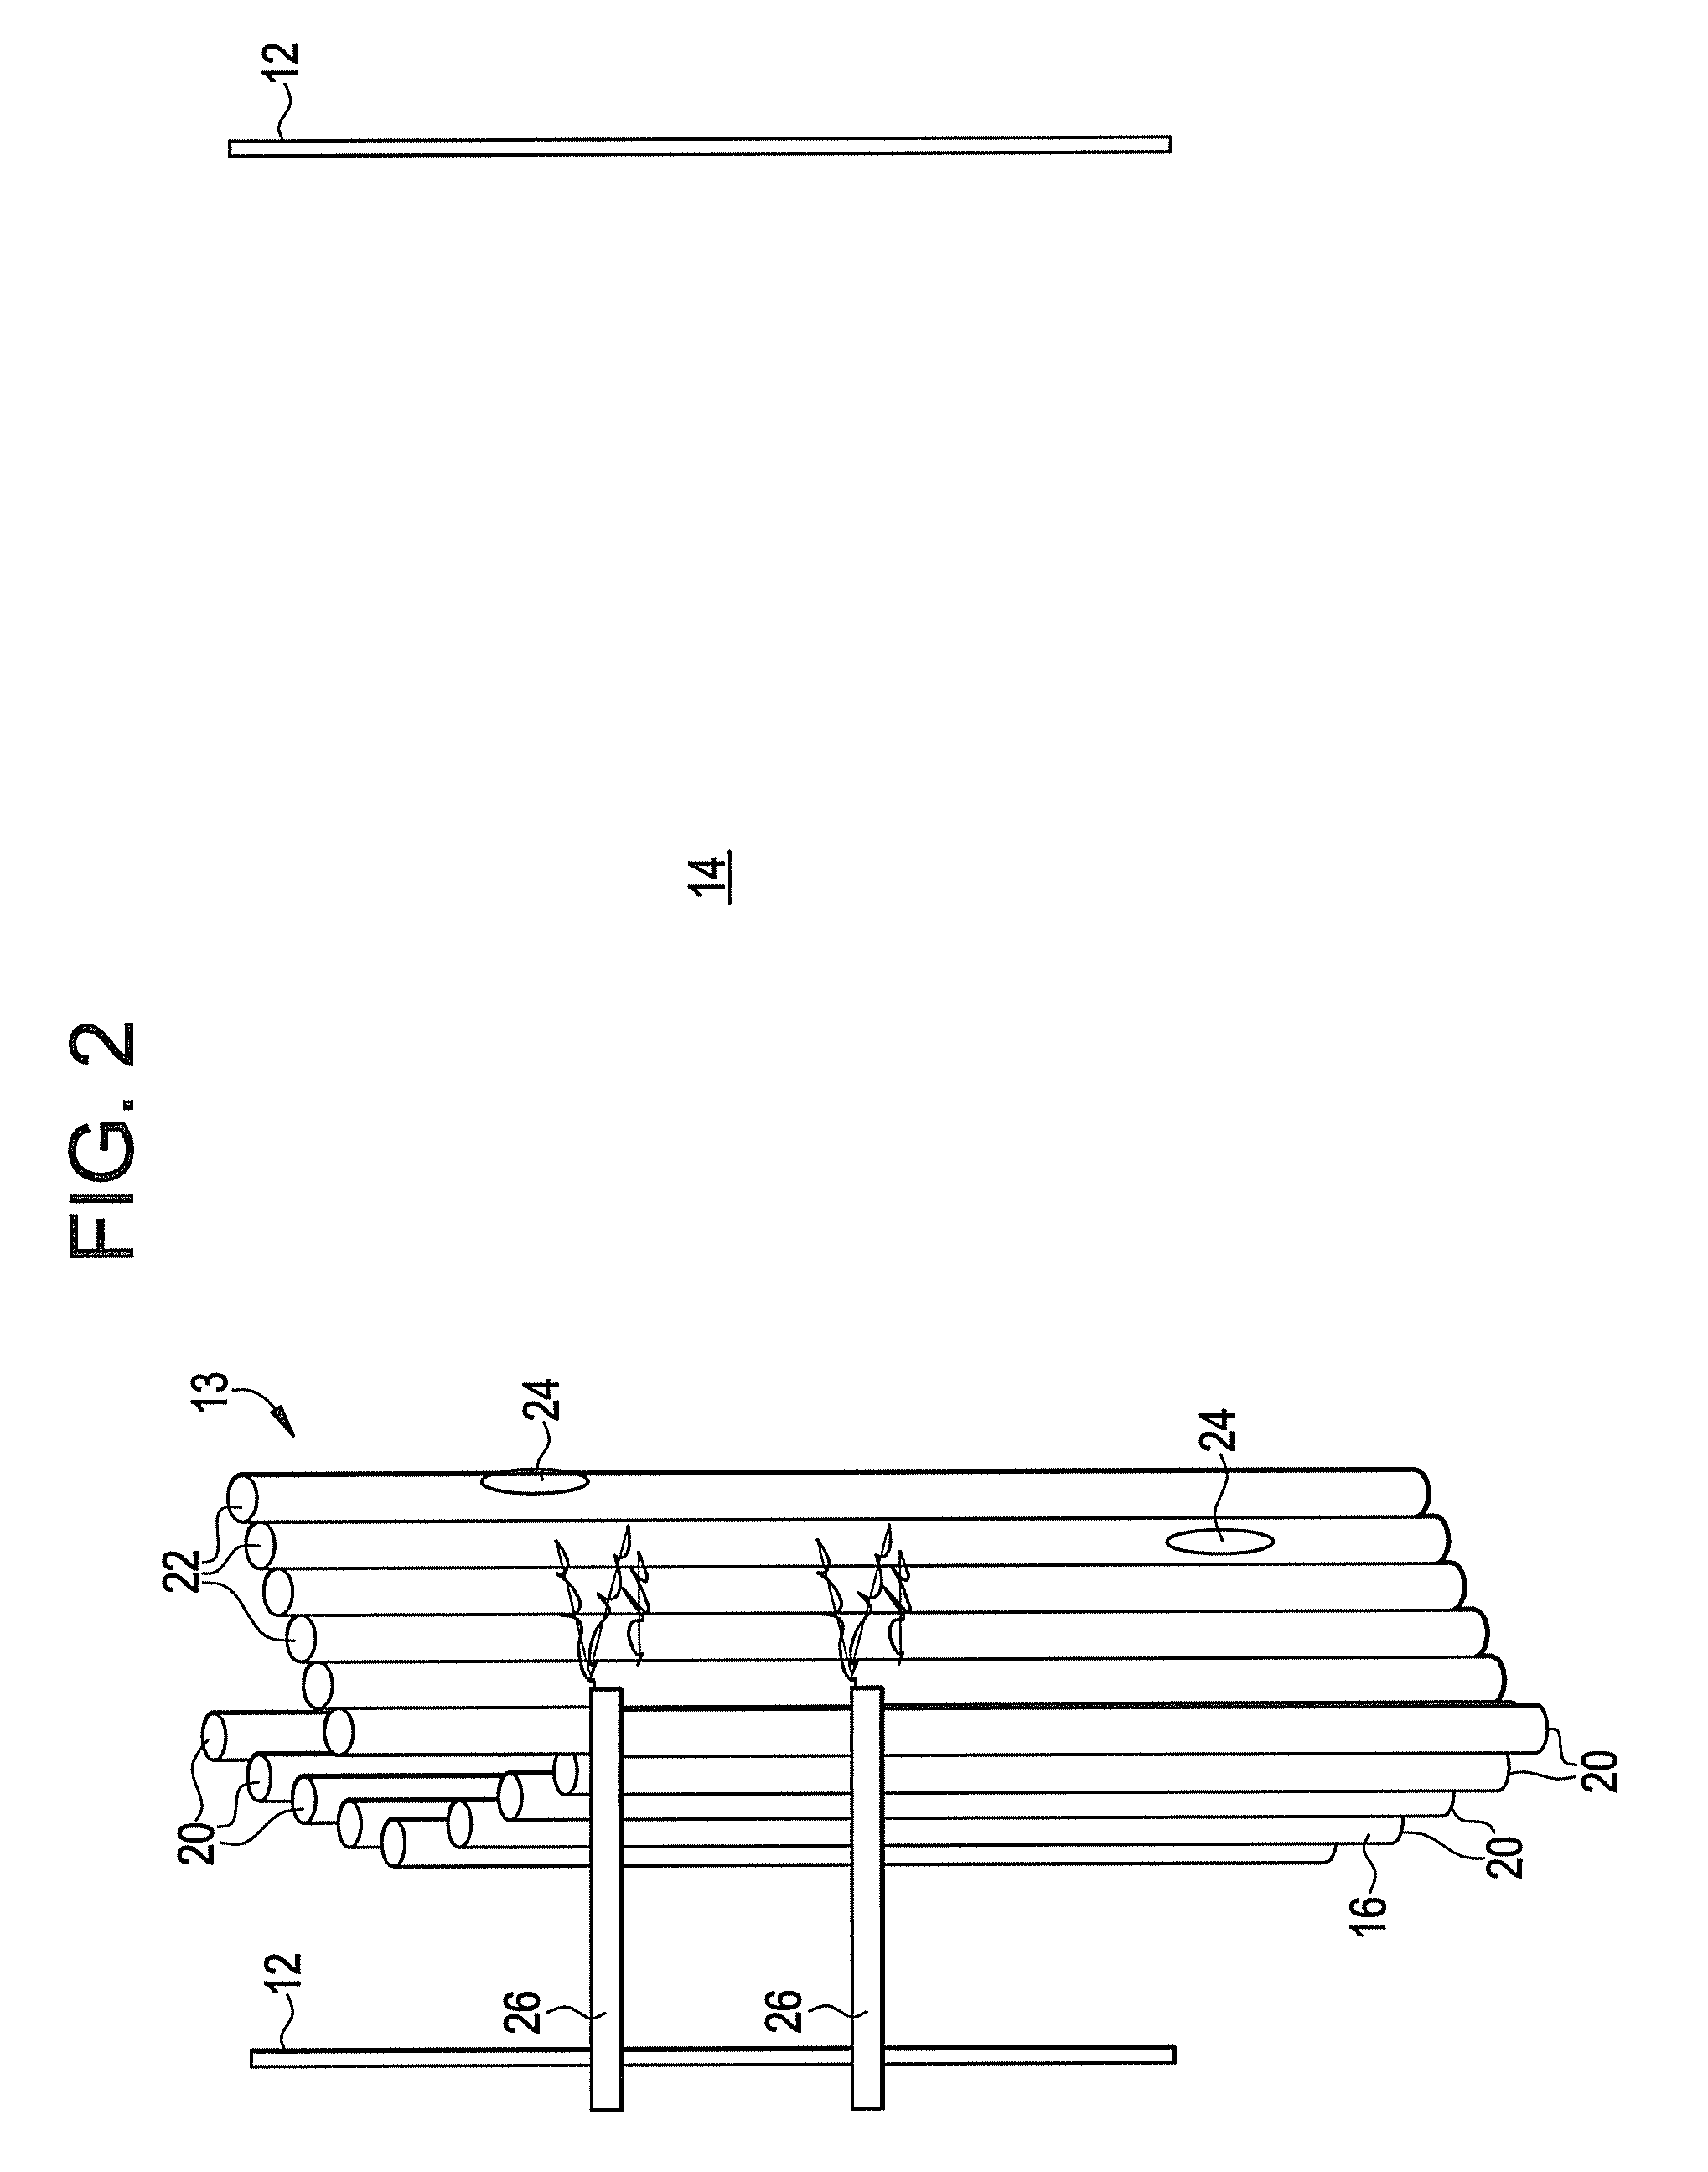 Method and apparatus of particulate removal from gasifier components